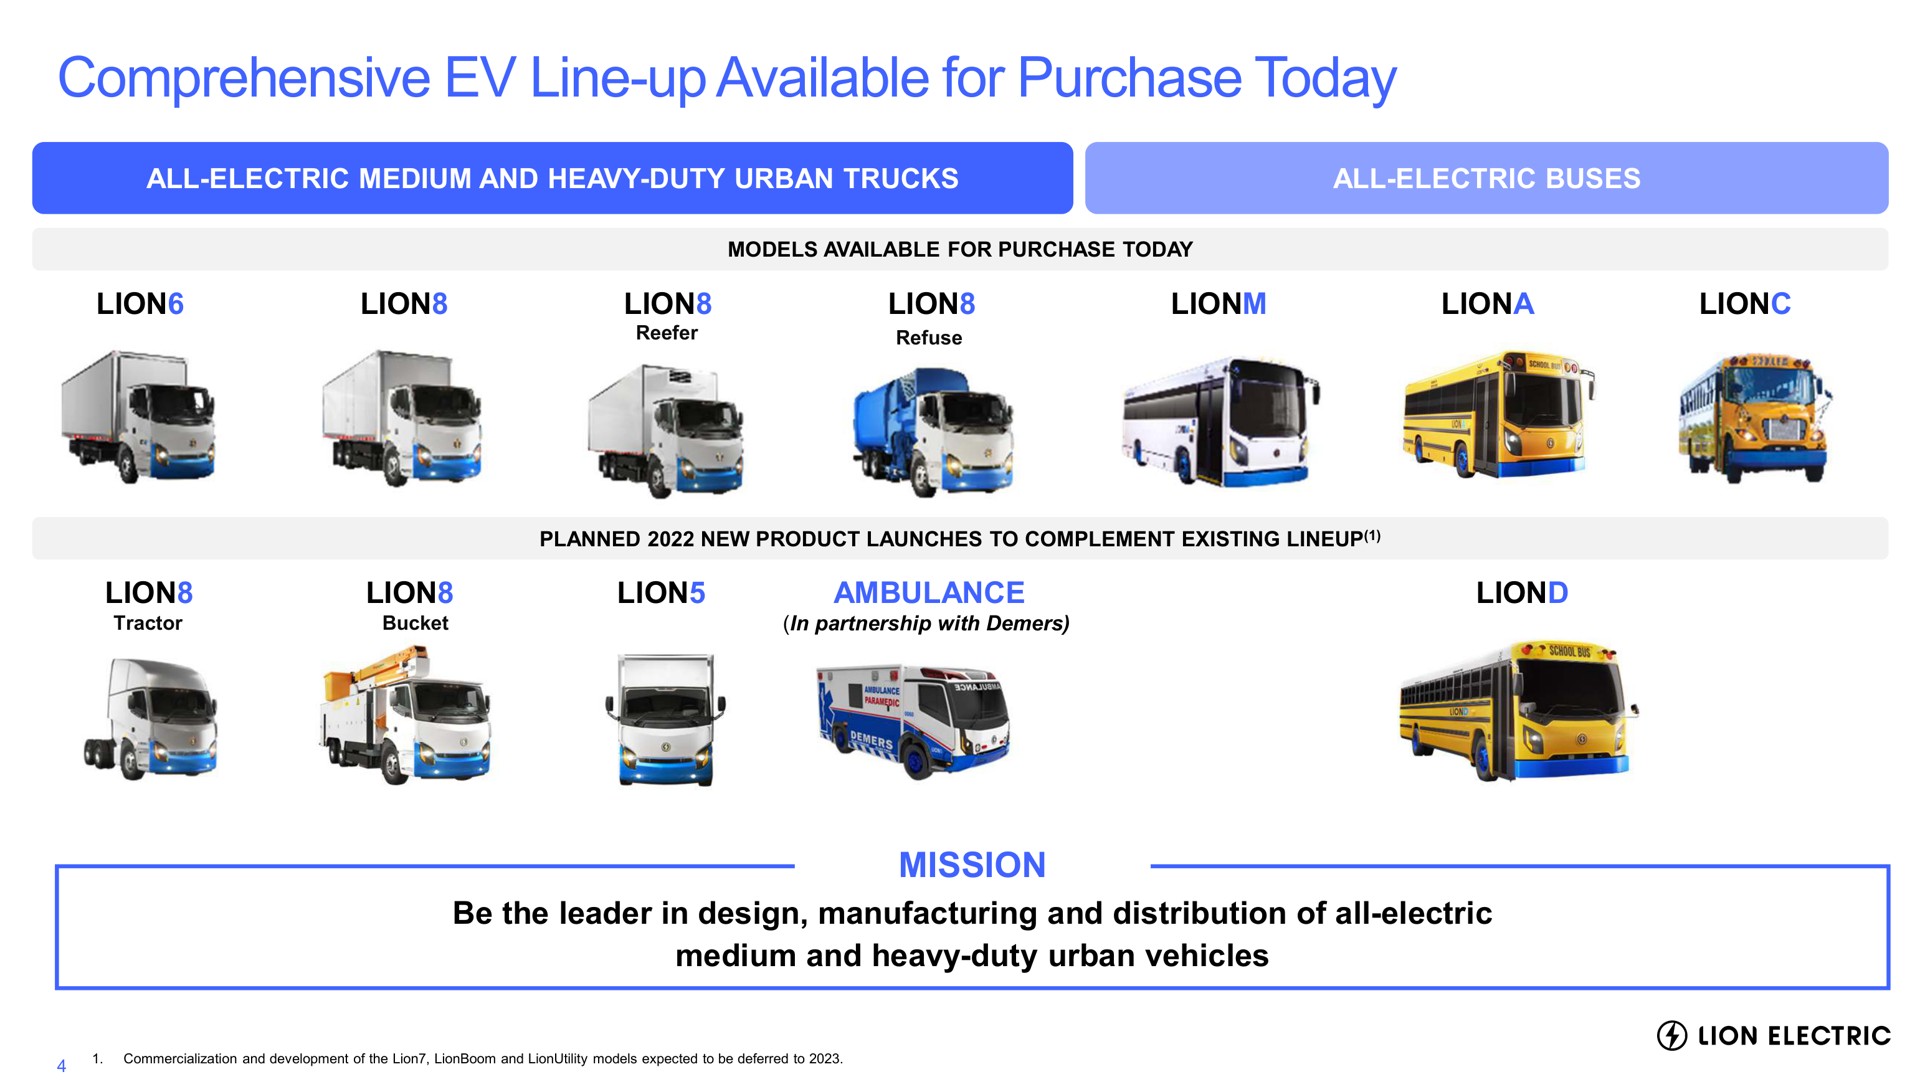 comprehensive line up available for purchase today lion lion lion lion lion lion lion ambulance mission be the leader in design manufacturing and distribution of all electric medium and heavy duty urban vehicles trucks buses lions lions lions lions lions lion electric | Lion Electric